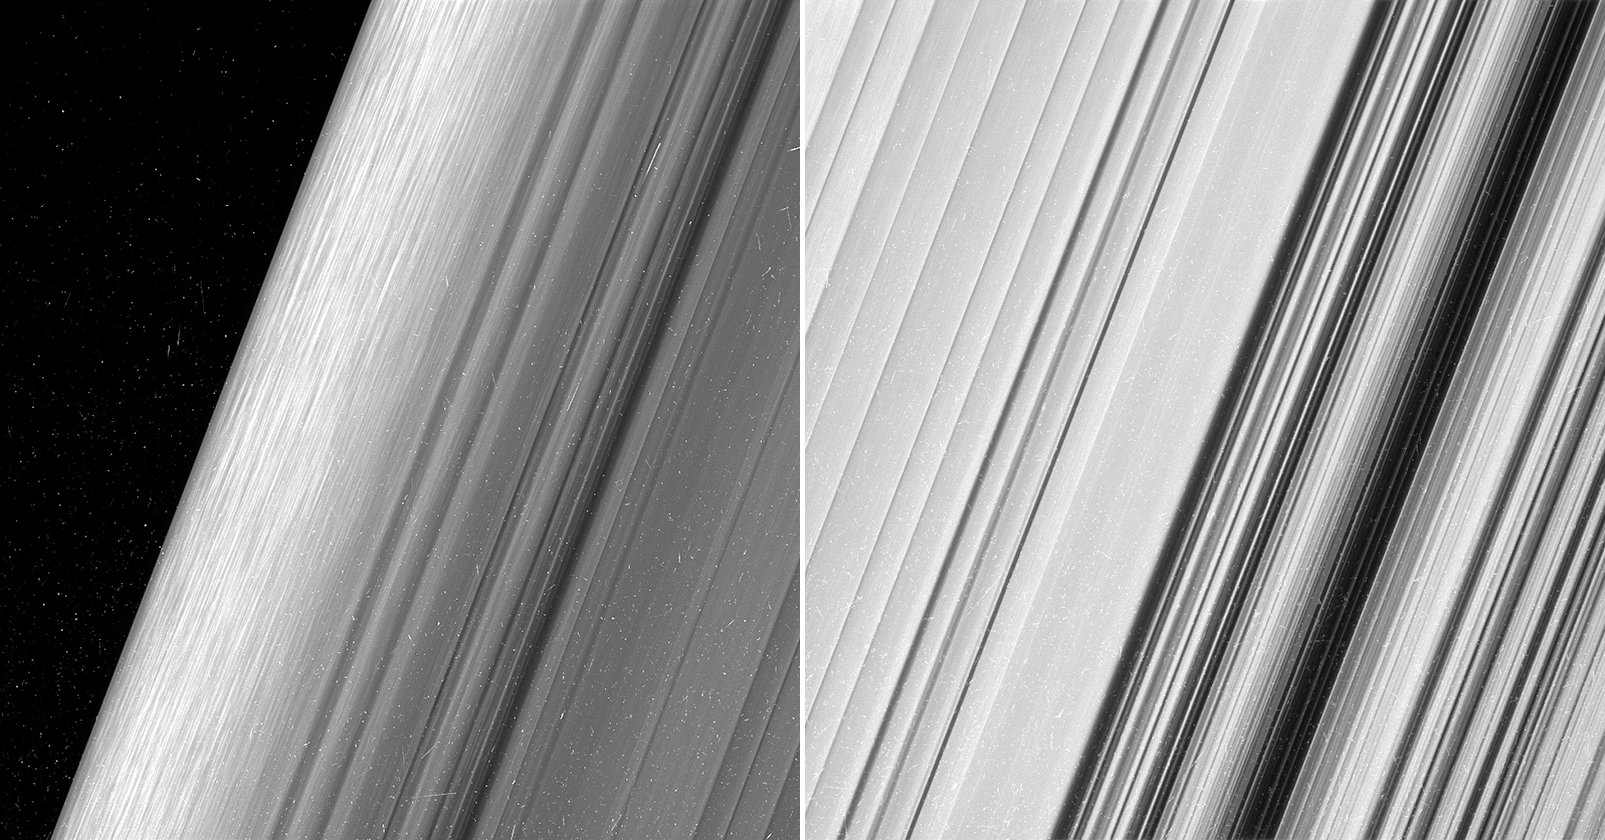 NASA Releases Most Detailed Photos of Saturns Rings Ever Taken